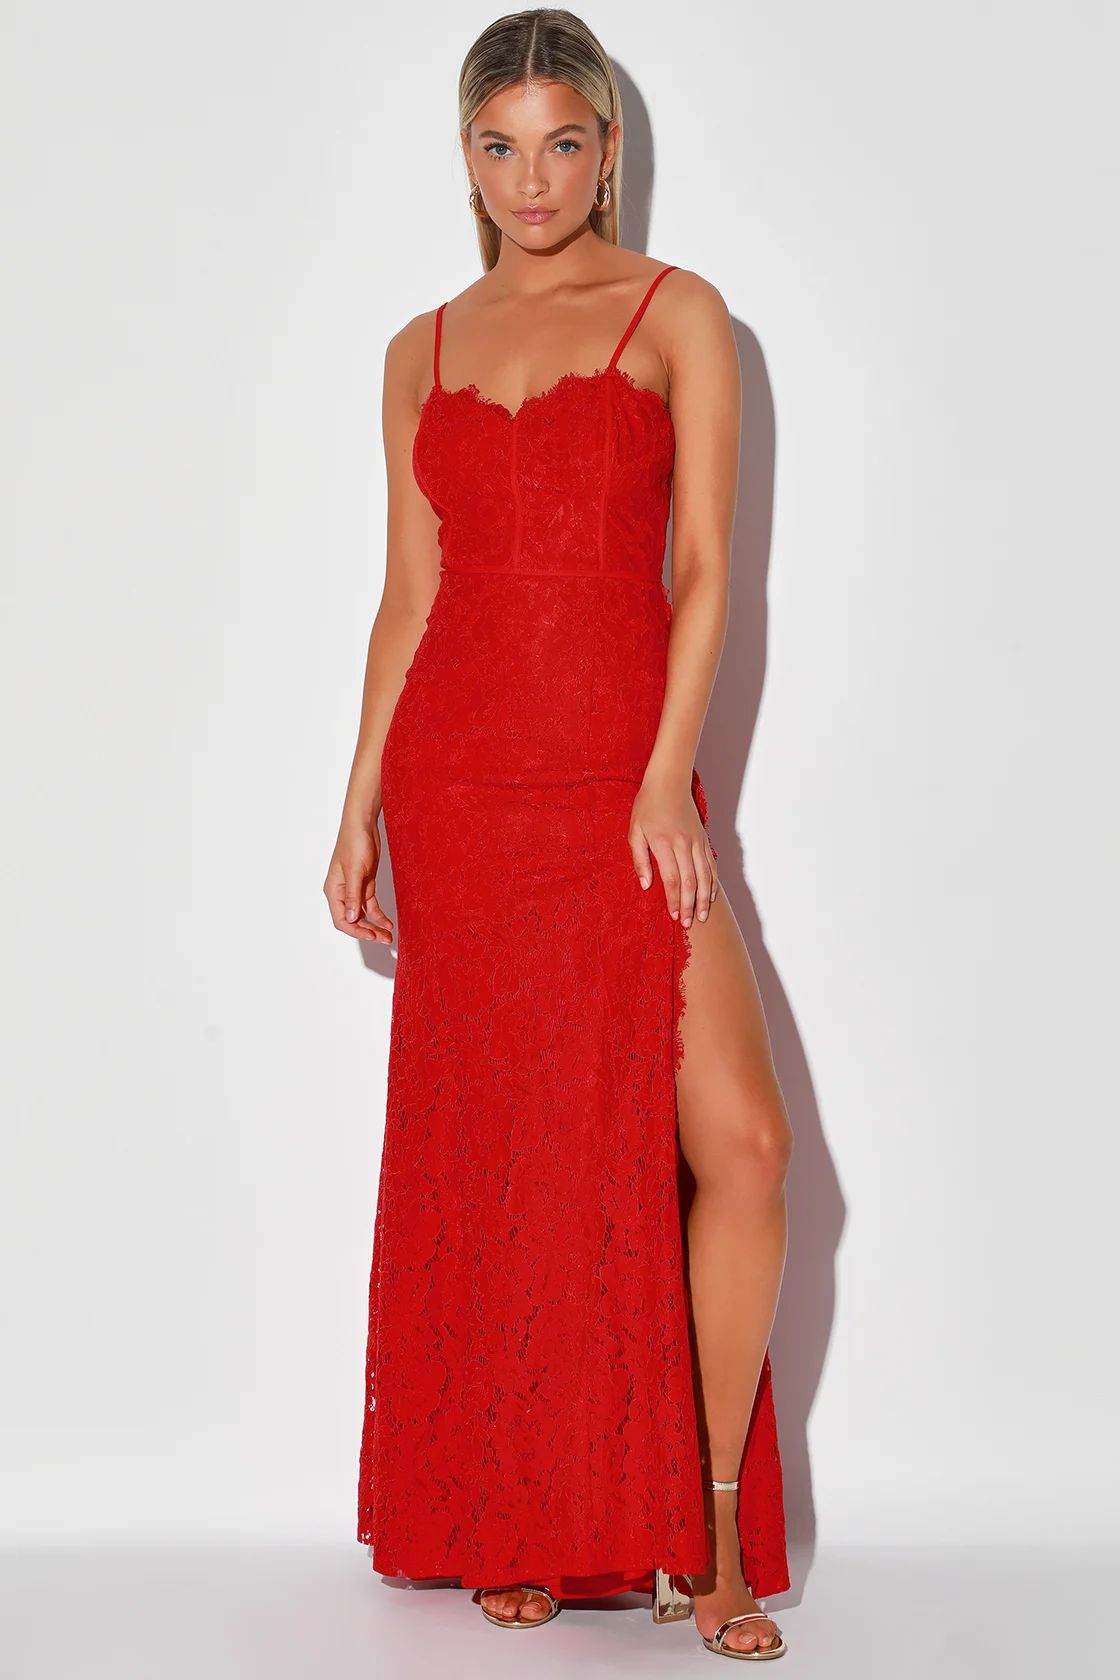 Song of the Siren Red Lace Maxi Dress | Lulus (US)